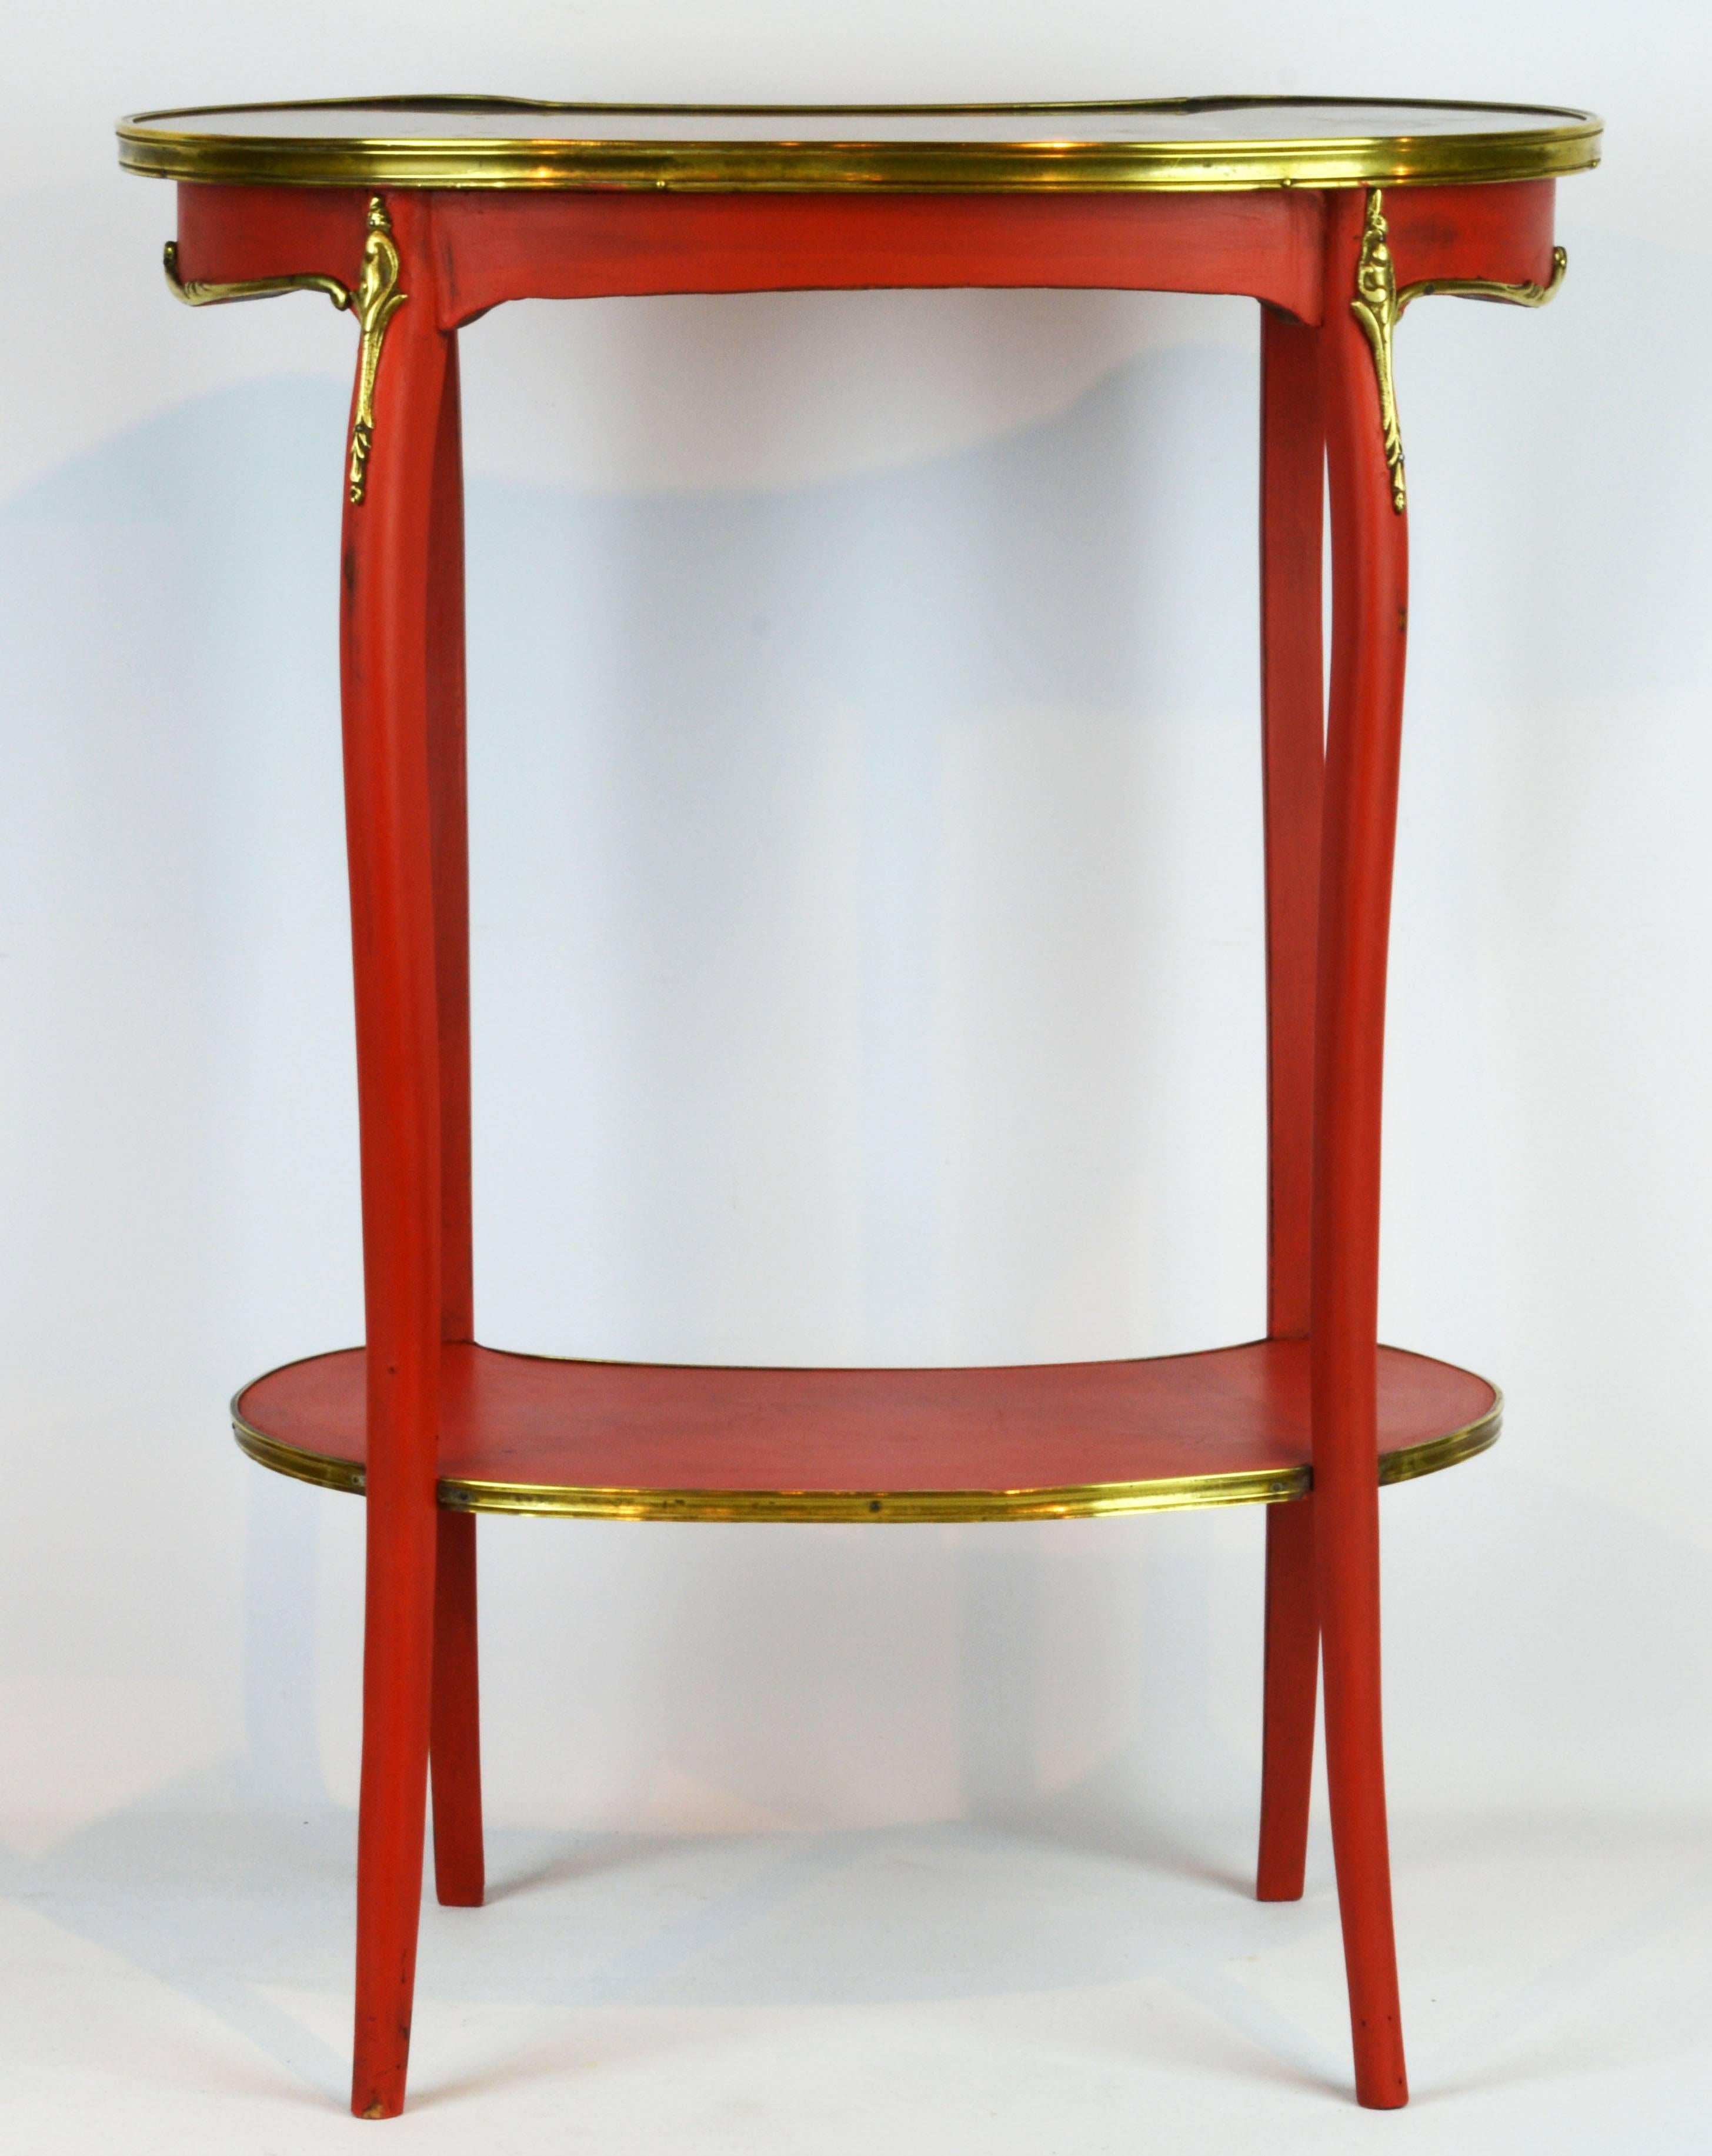 19th Century Charming French Provincial Painted and Bronze-Mounted Kidney Shape Accent Table